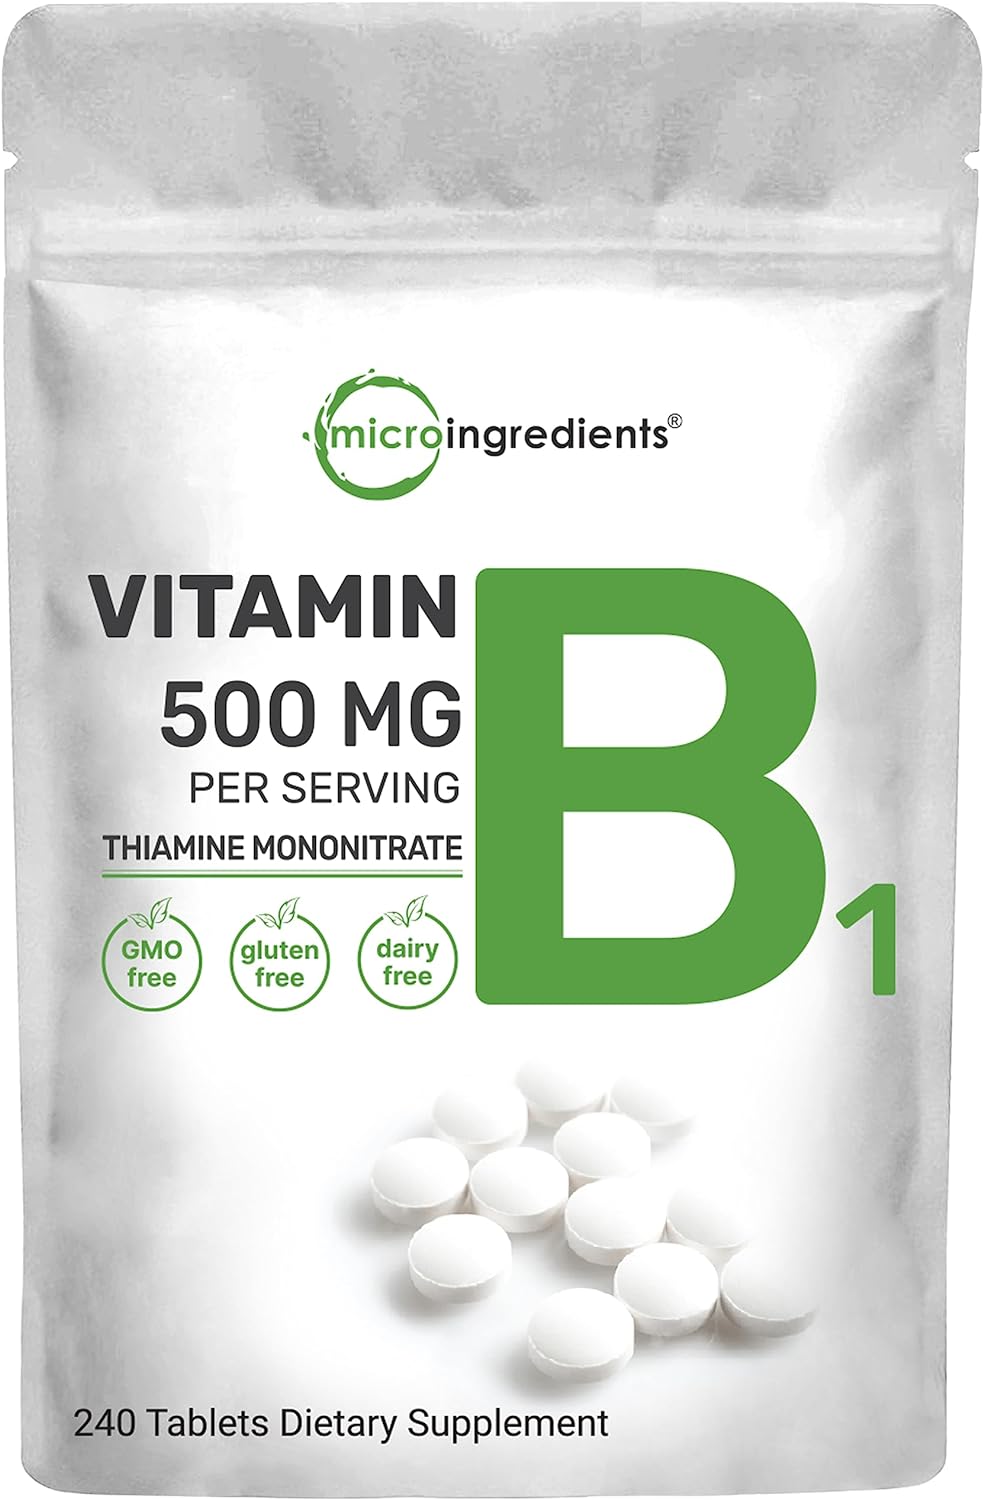 Micro Ingredients Vitamin B1 500mg Per Serving, 240 Tablets | Vitamin B1 Thiamine Supplement, Essential B Vitamins | Supports Metabolism & Healthy Nervous System | Non-GMO, Easy to Swallow